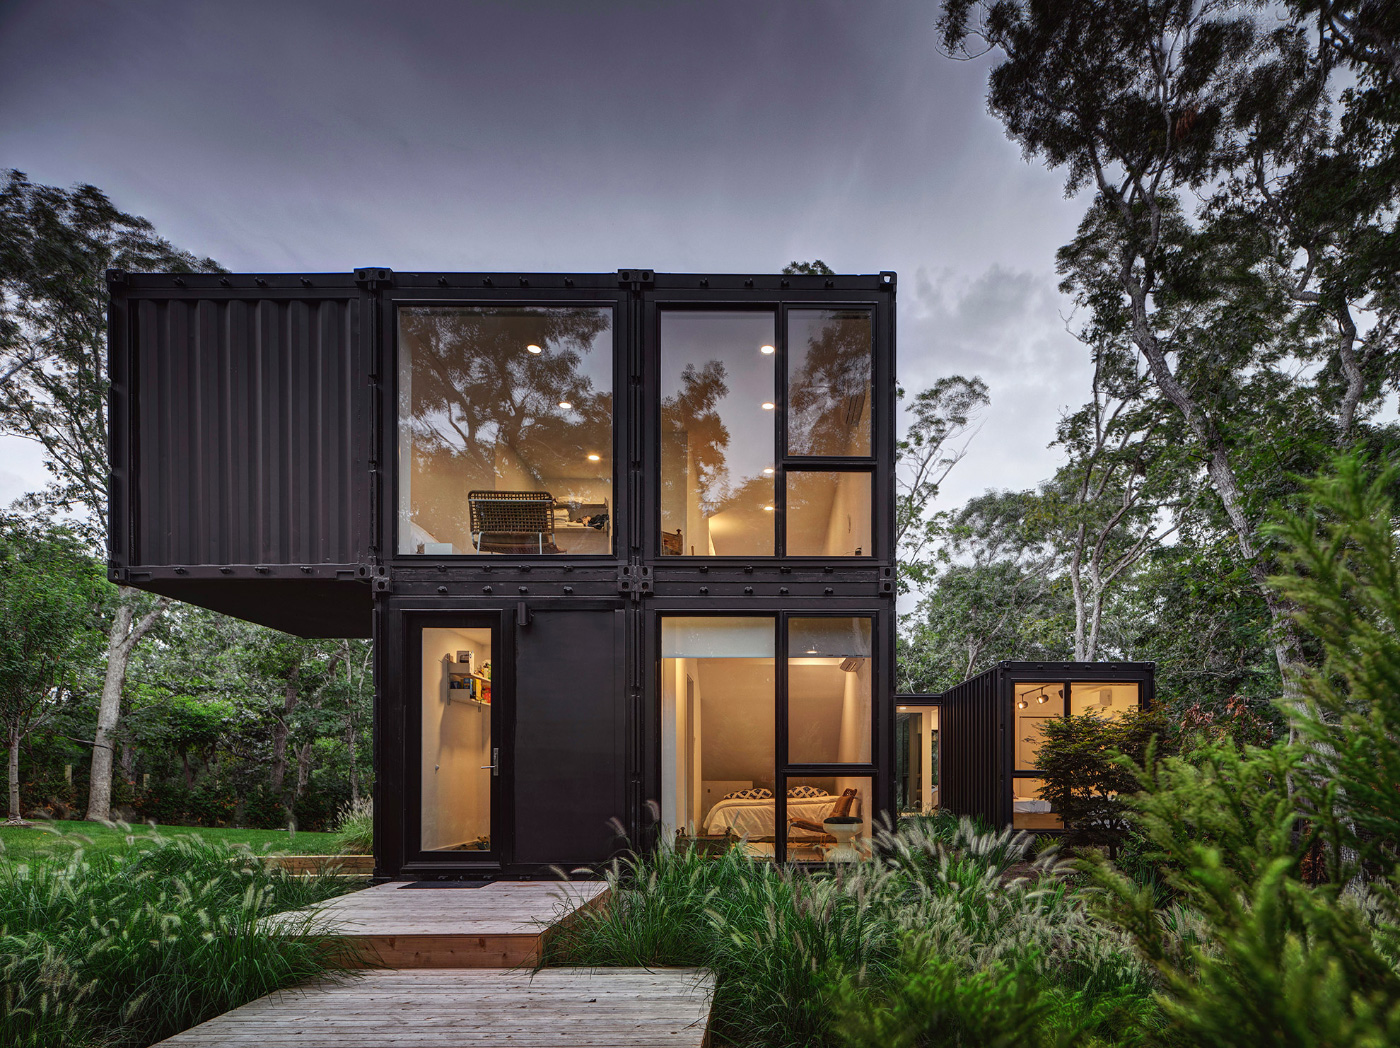 A home constructed of shipping containers